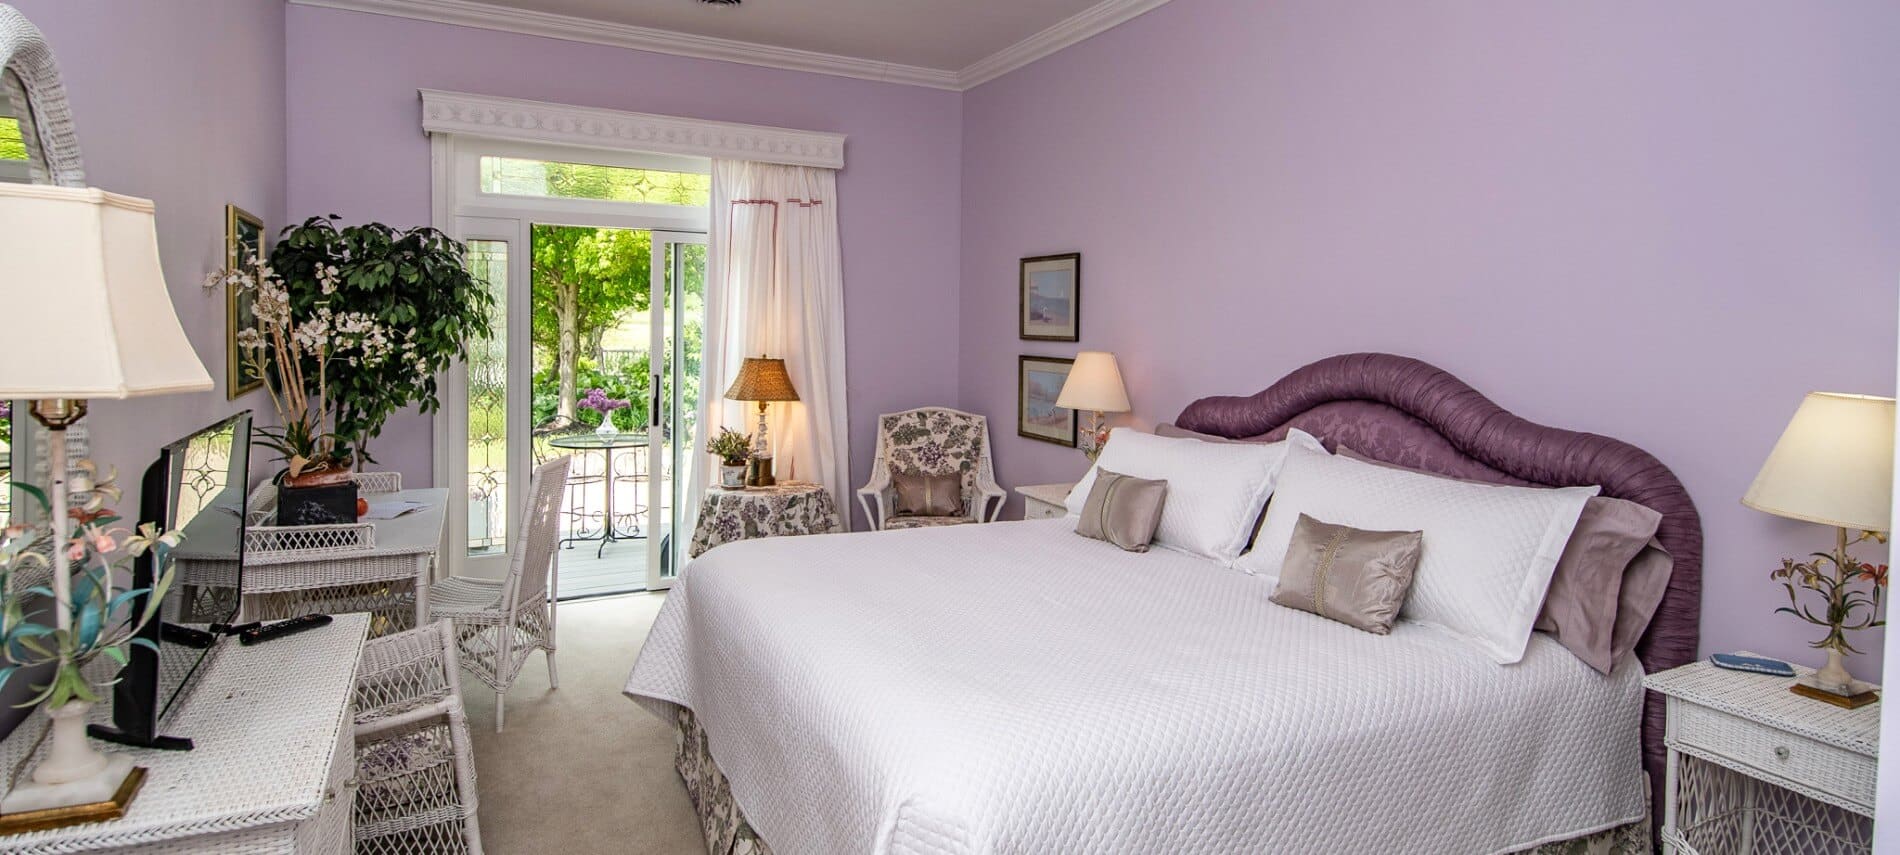 Light filled bedroom with lavender walls and a french door holds a bed with a purple upholstered headboard.